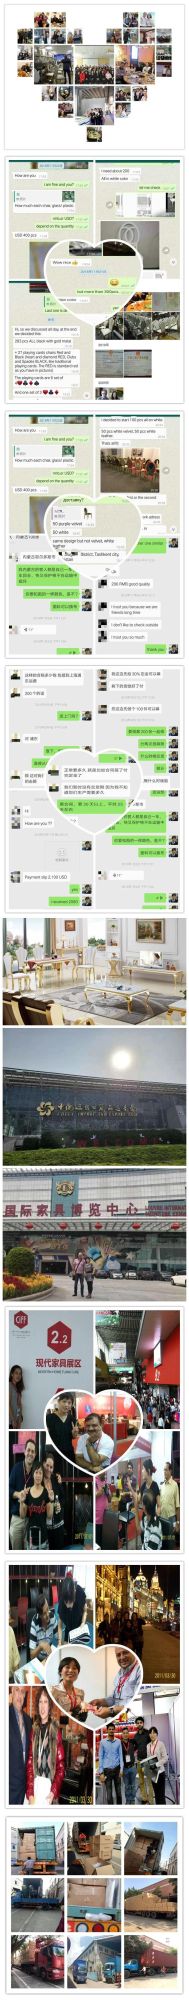 Modern Fancy Dining Room Table Chairs Events and Party Chair China Supplies Barcelona Hotel Furniture